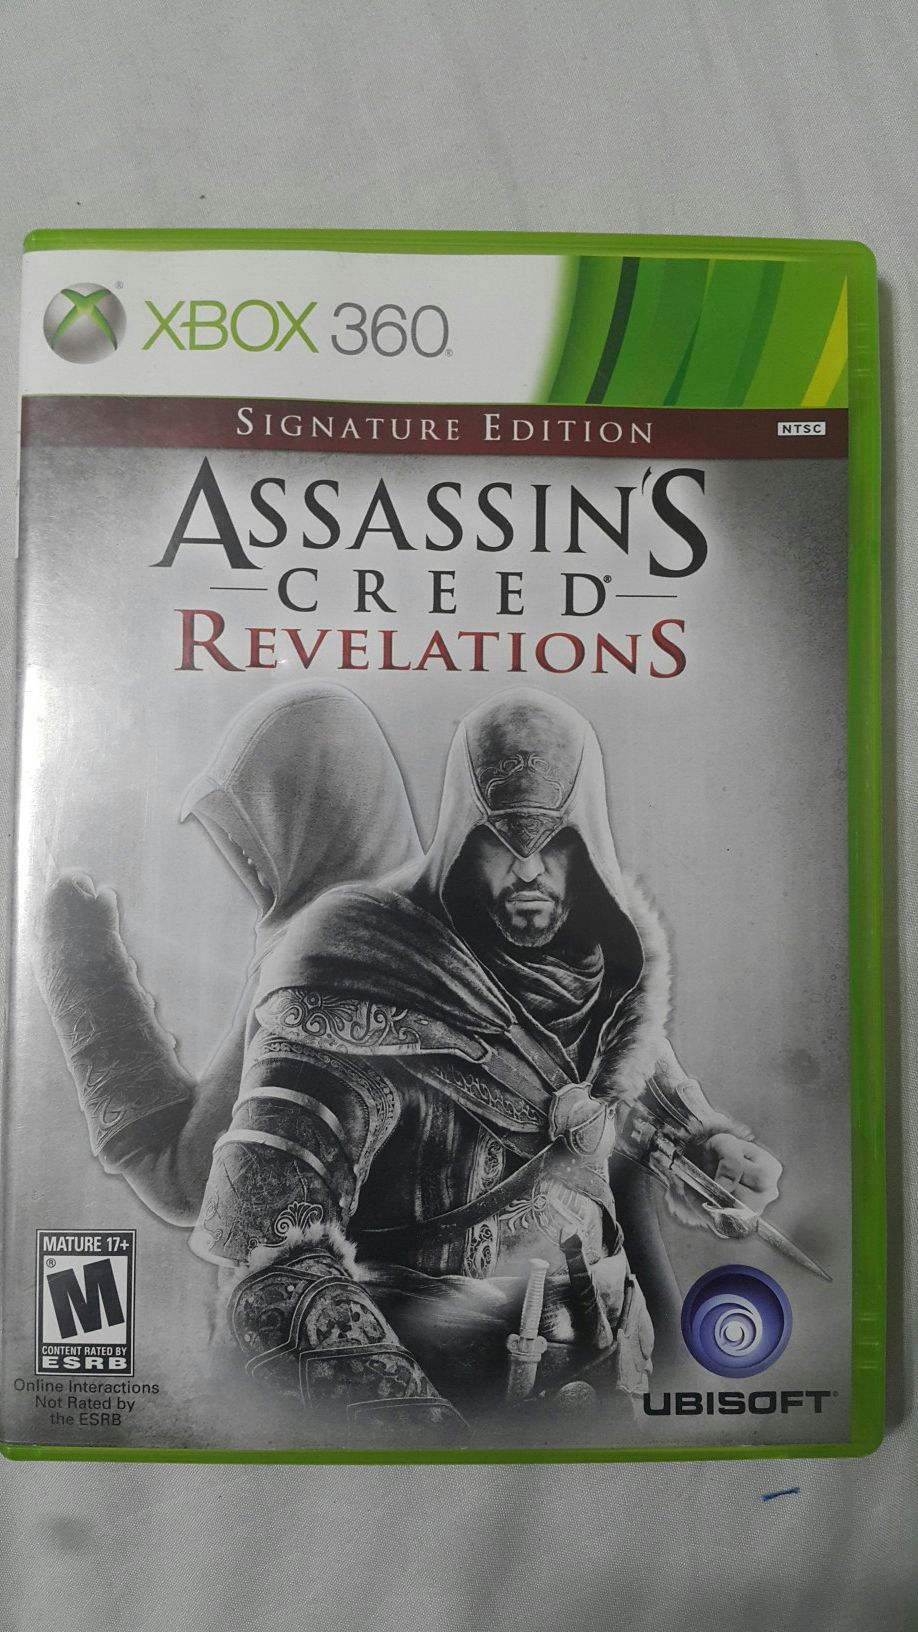 ASSASSINS CREED RELEVATIONS FOR XBOX 360 (#2)